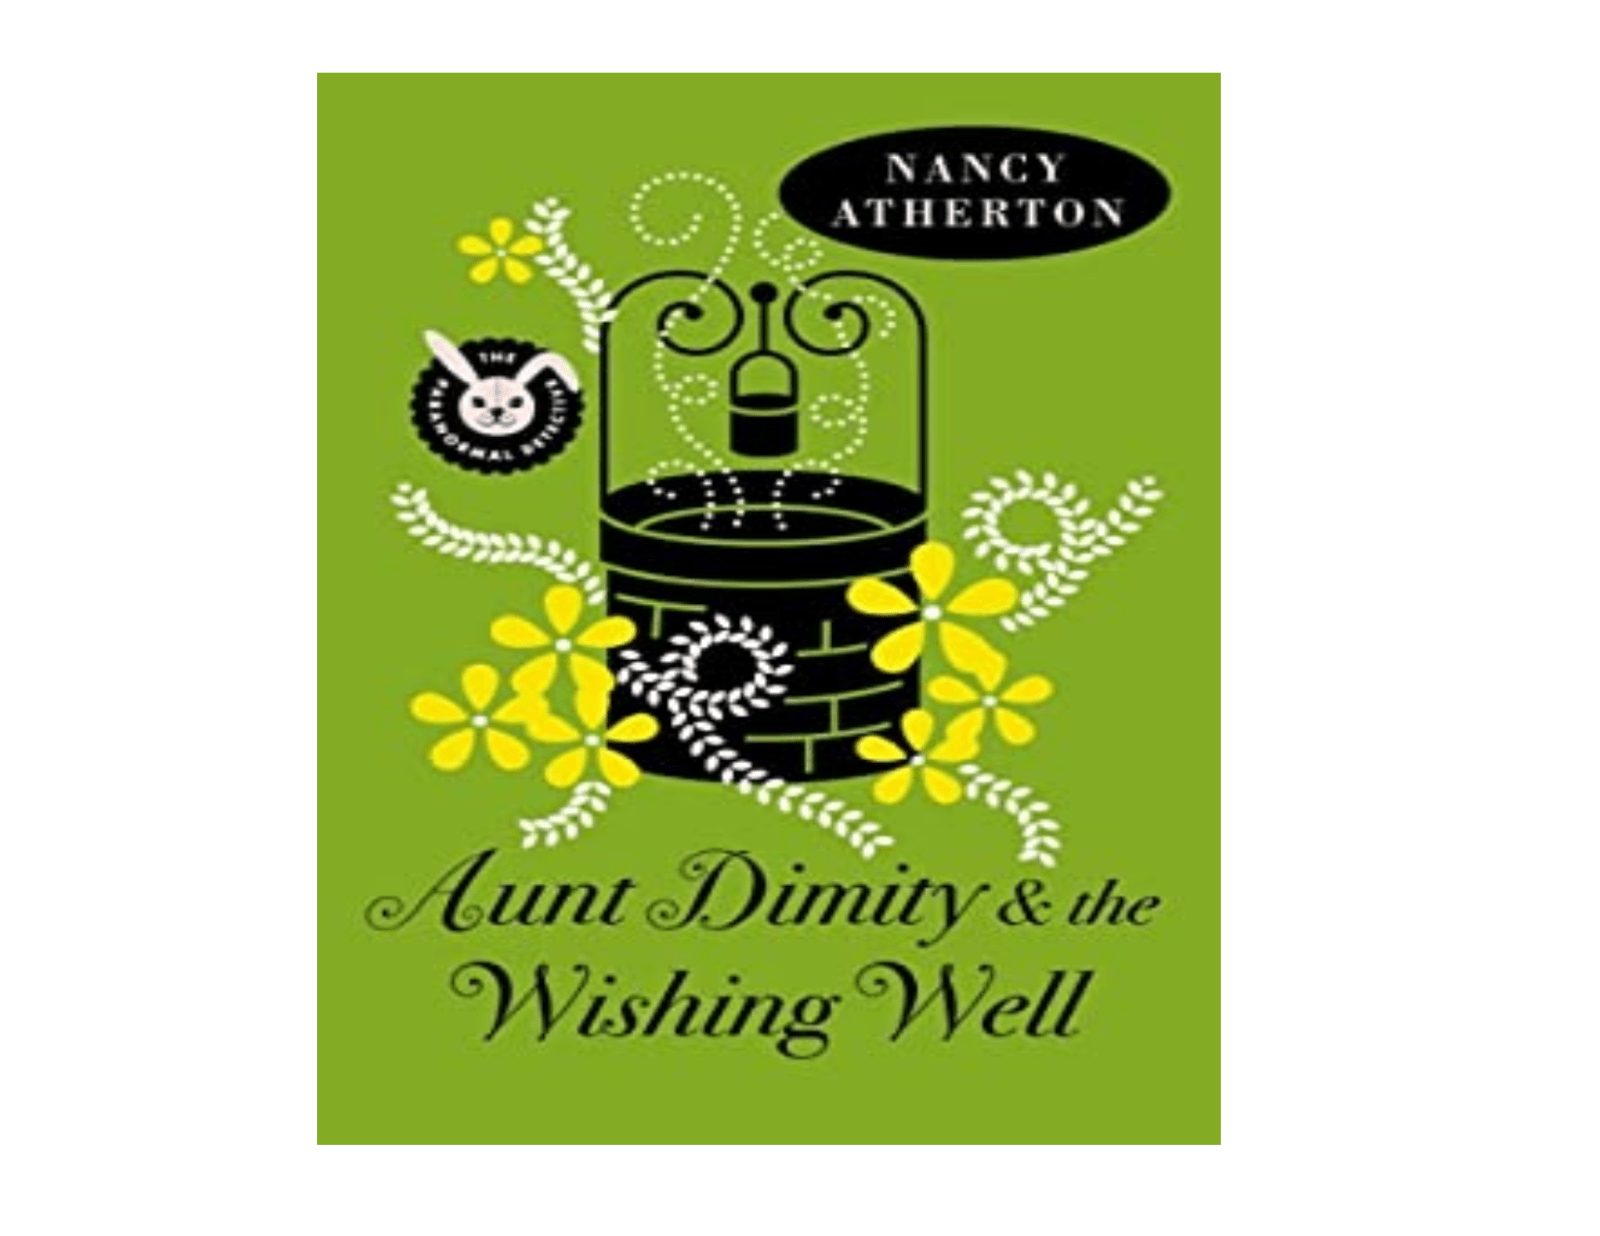 Wishing Well book cover